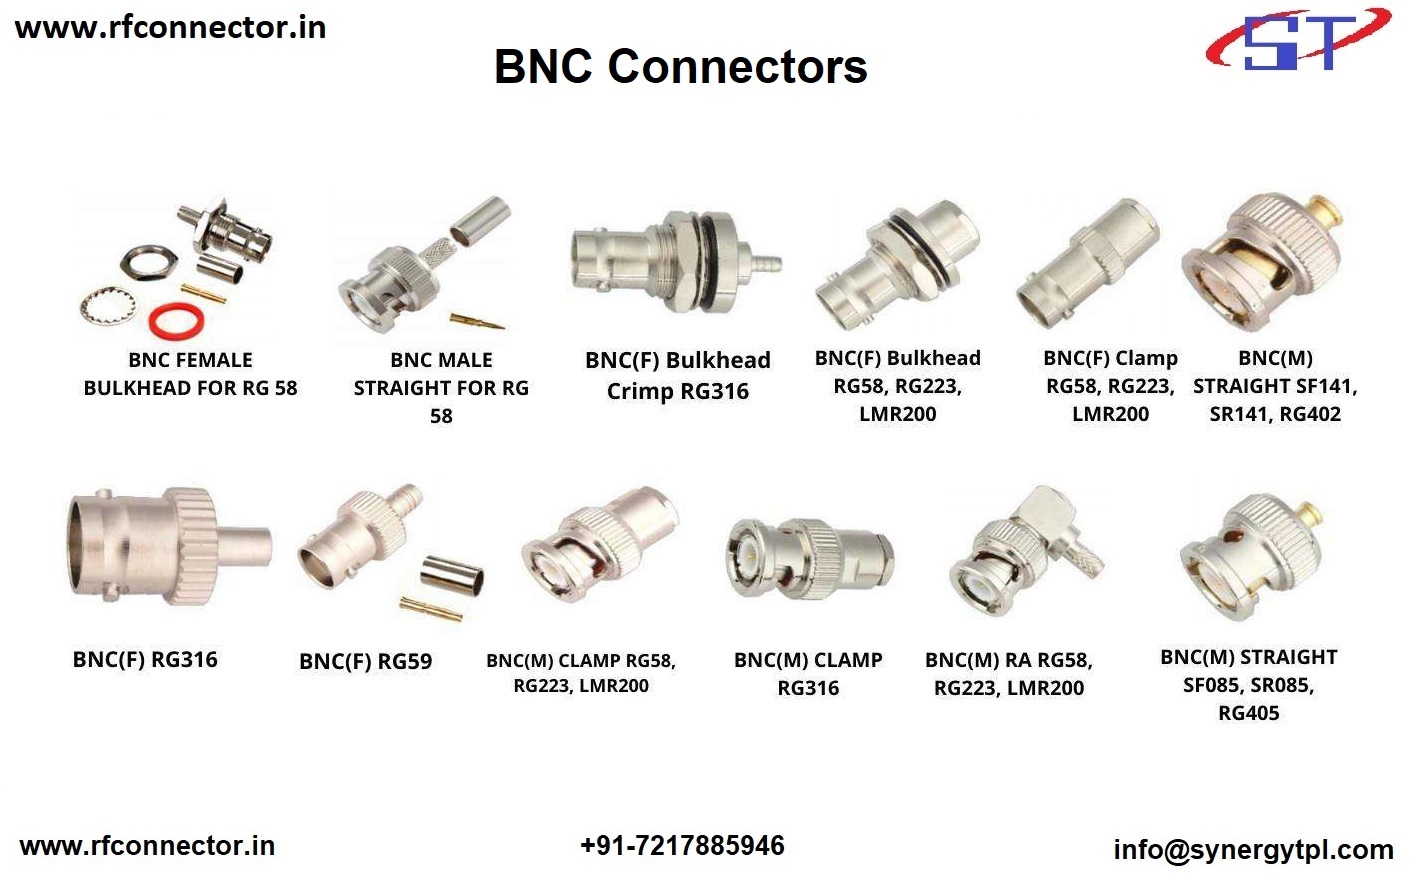 TNC female connector for LMR 200 cable